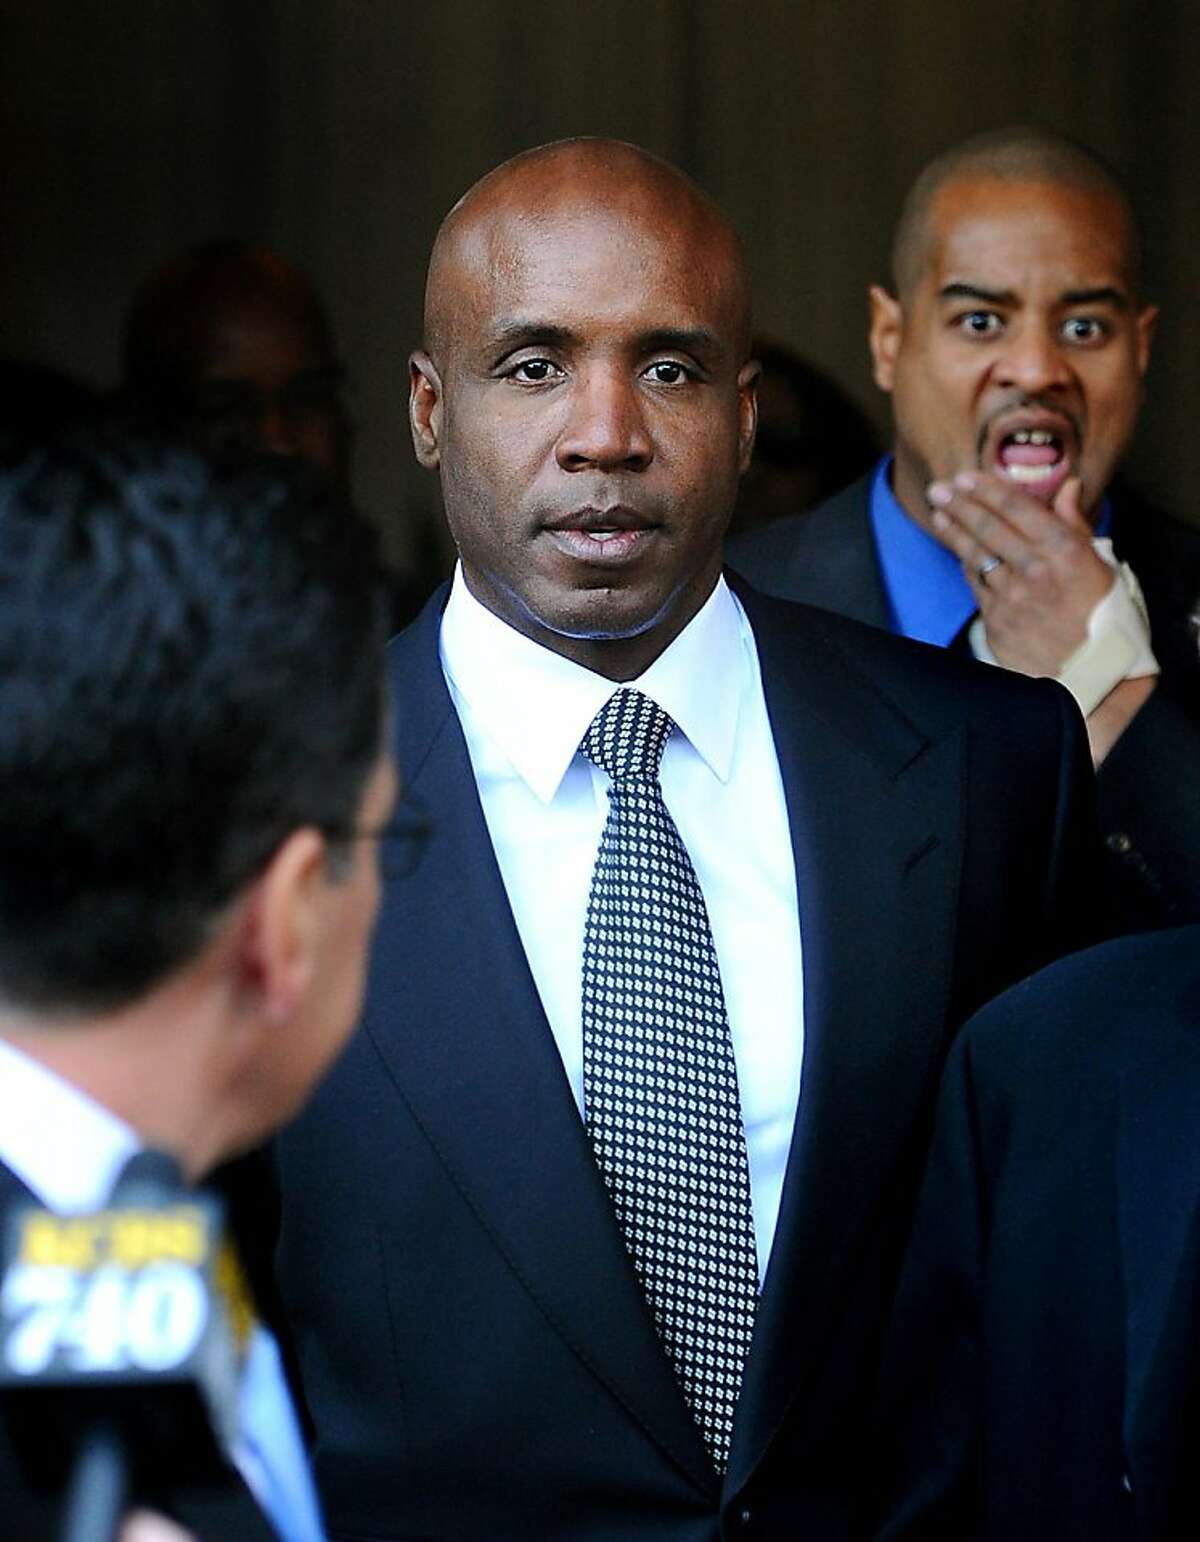 Former baseball player Barry Bonds leaves federal court after being sentenced for obstructing justice in a government steroids investigation on Friday, Dec. 16, 2011, in San Francisco. A federal judge handed Bonds a sentence of 30 days of house arrest, two years of probation and 250 hours of community service, but delayed the sentence pending an appeal likely to take a year or more. (AP Photo/Noah Berger)